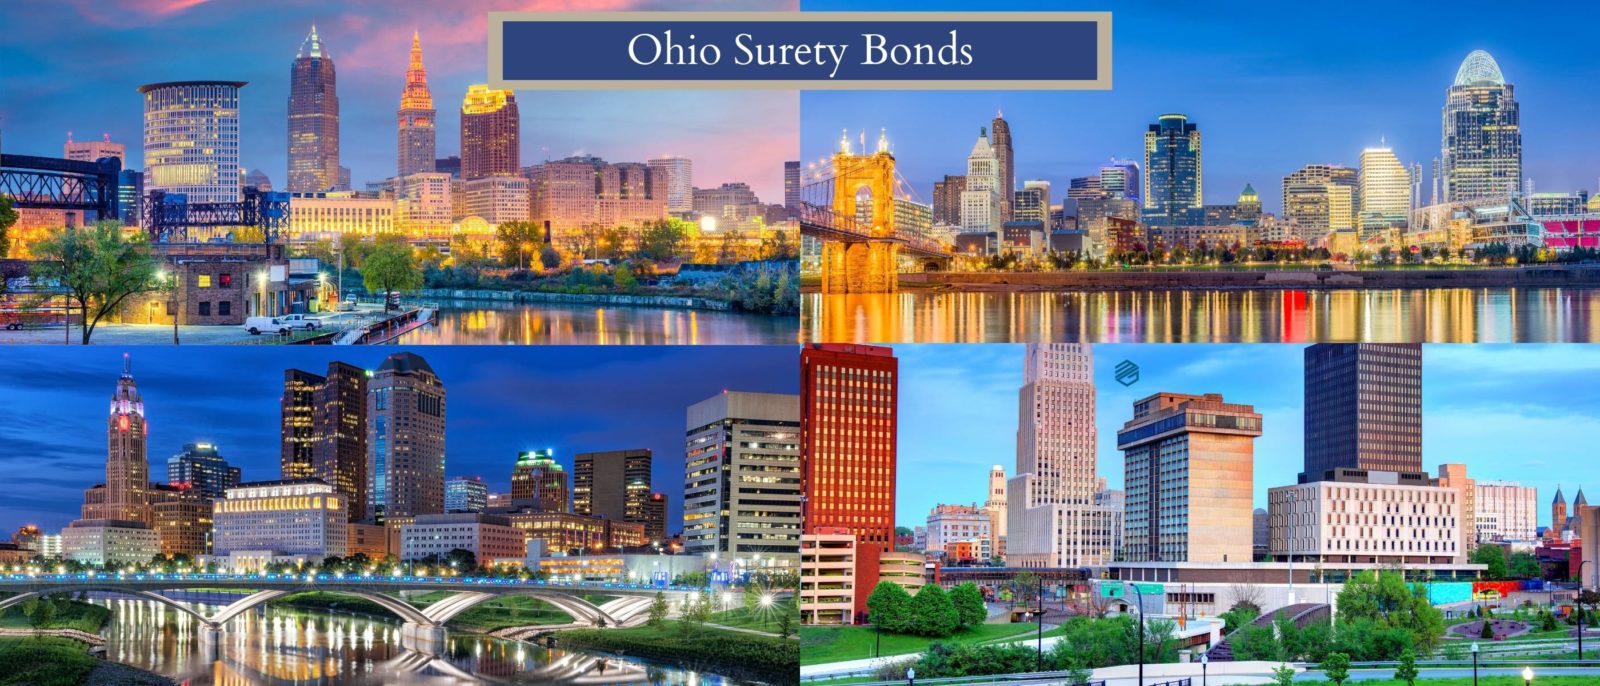 Ohio Surety Bonds - Pictures of Cleveland, Akron, Columbus, and Cincinnati Ohio. The words "Ohio Surety Bonds" in a blue and beige text box